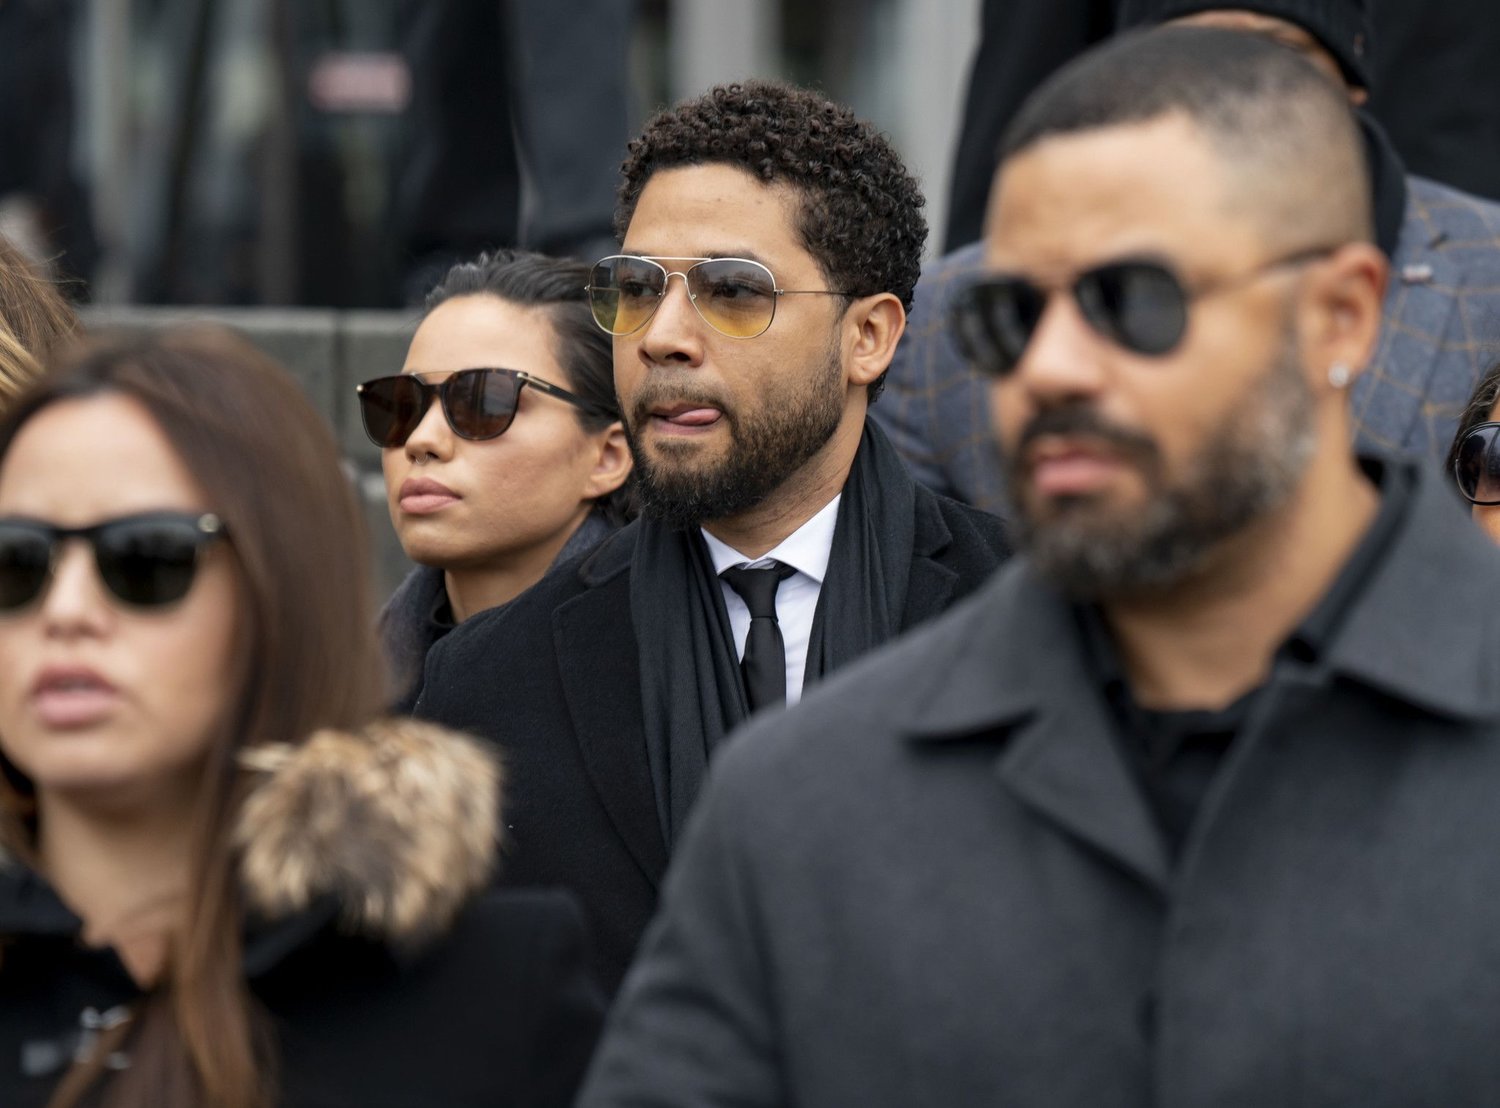 Jussie Smollett departs after a court appearance Feb. 24, 2020, at the Leighton Criminal Court Building. (Brian Cassella/Chicago Tribune/TNS)